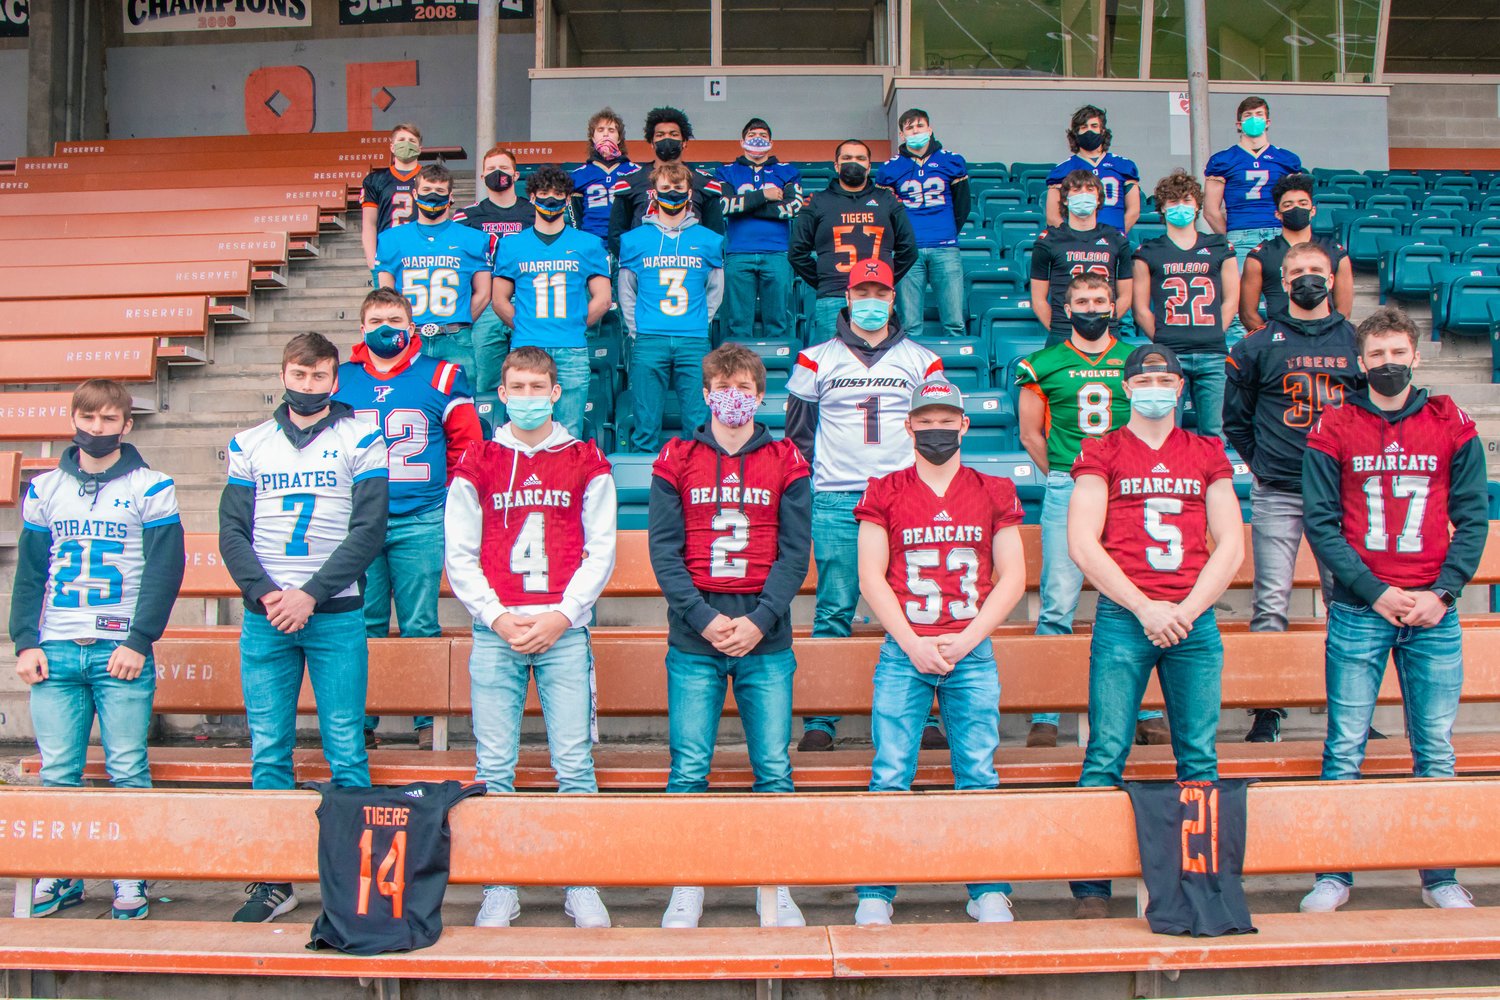 Athletes chosen for the All-Area Football Team pose for a photo at Tiger Stadium sporting their school’s football jerseys. Centralia jerseys draped over the seats in front were Benito Valencia (14) and Santos Lafferty (21), who were unable to attend the photo shoot.